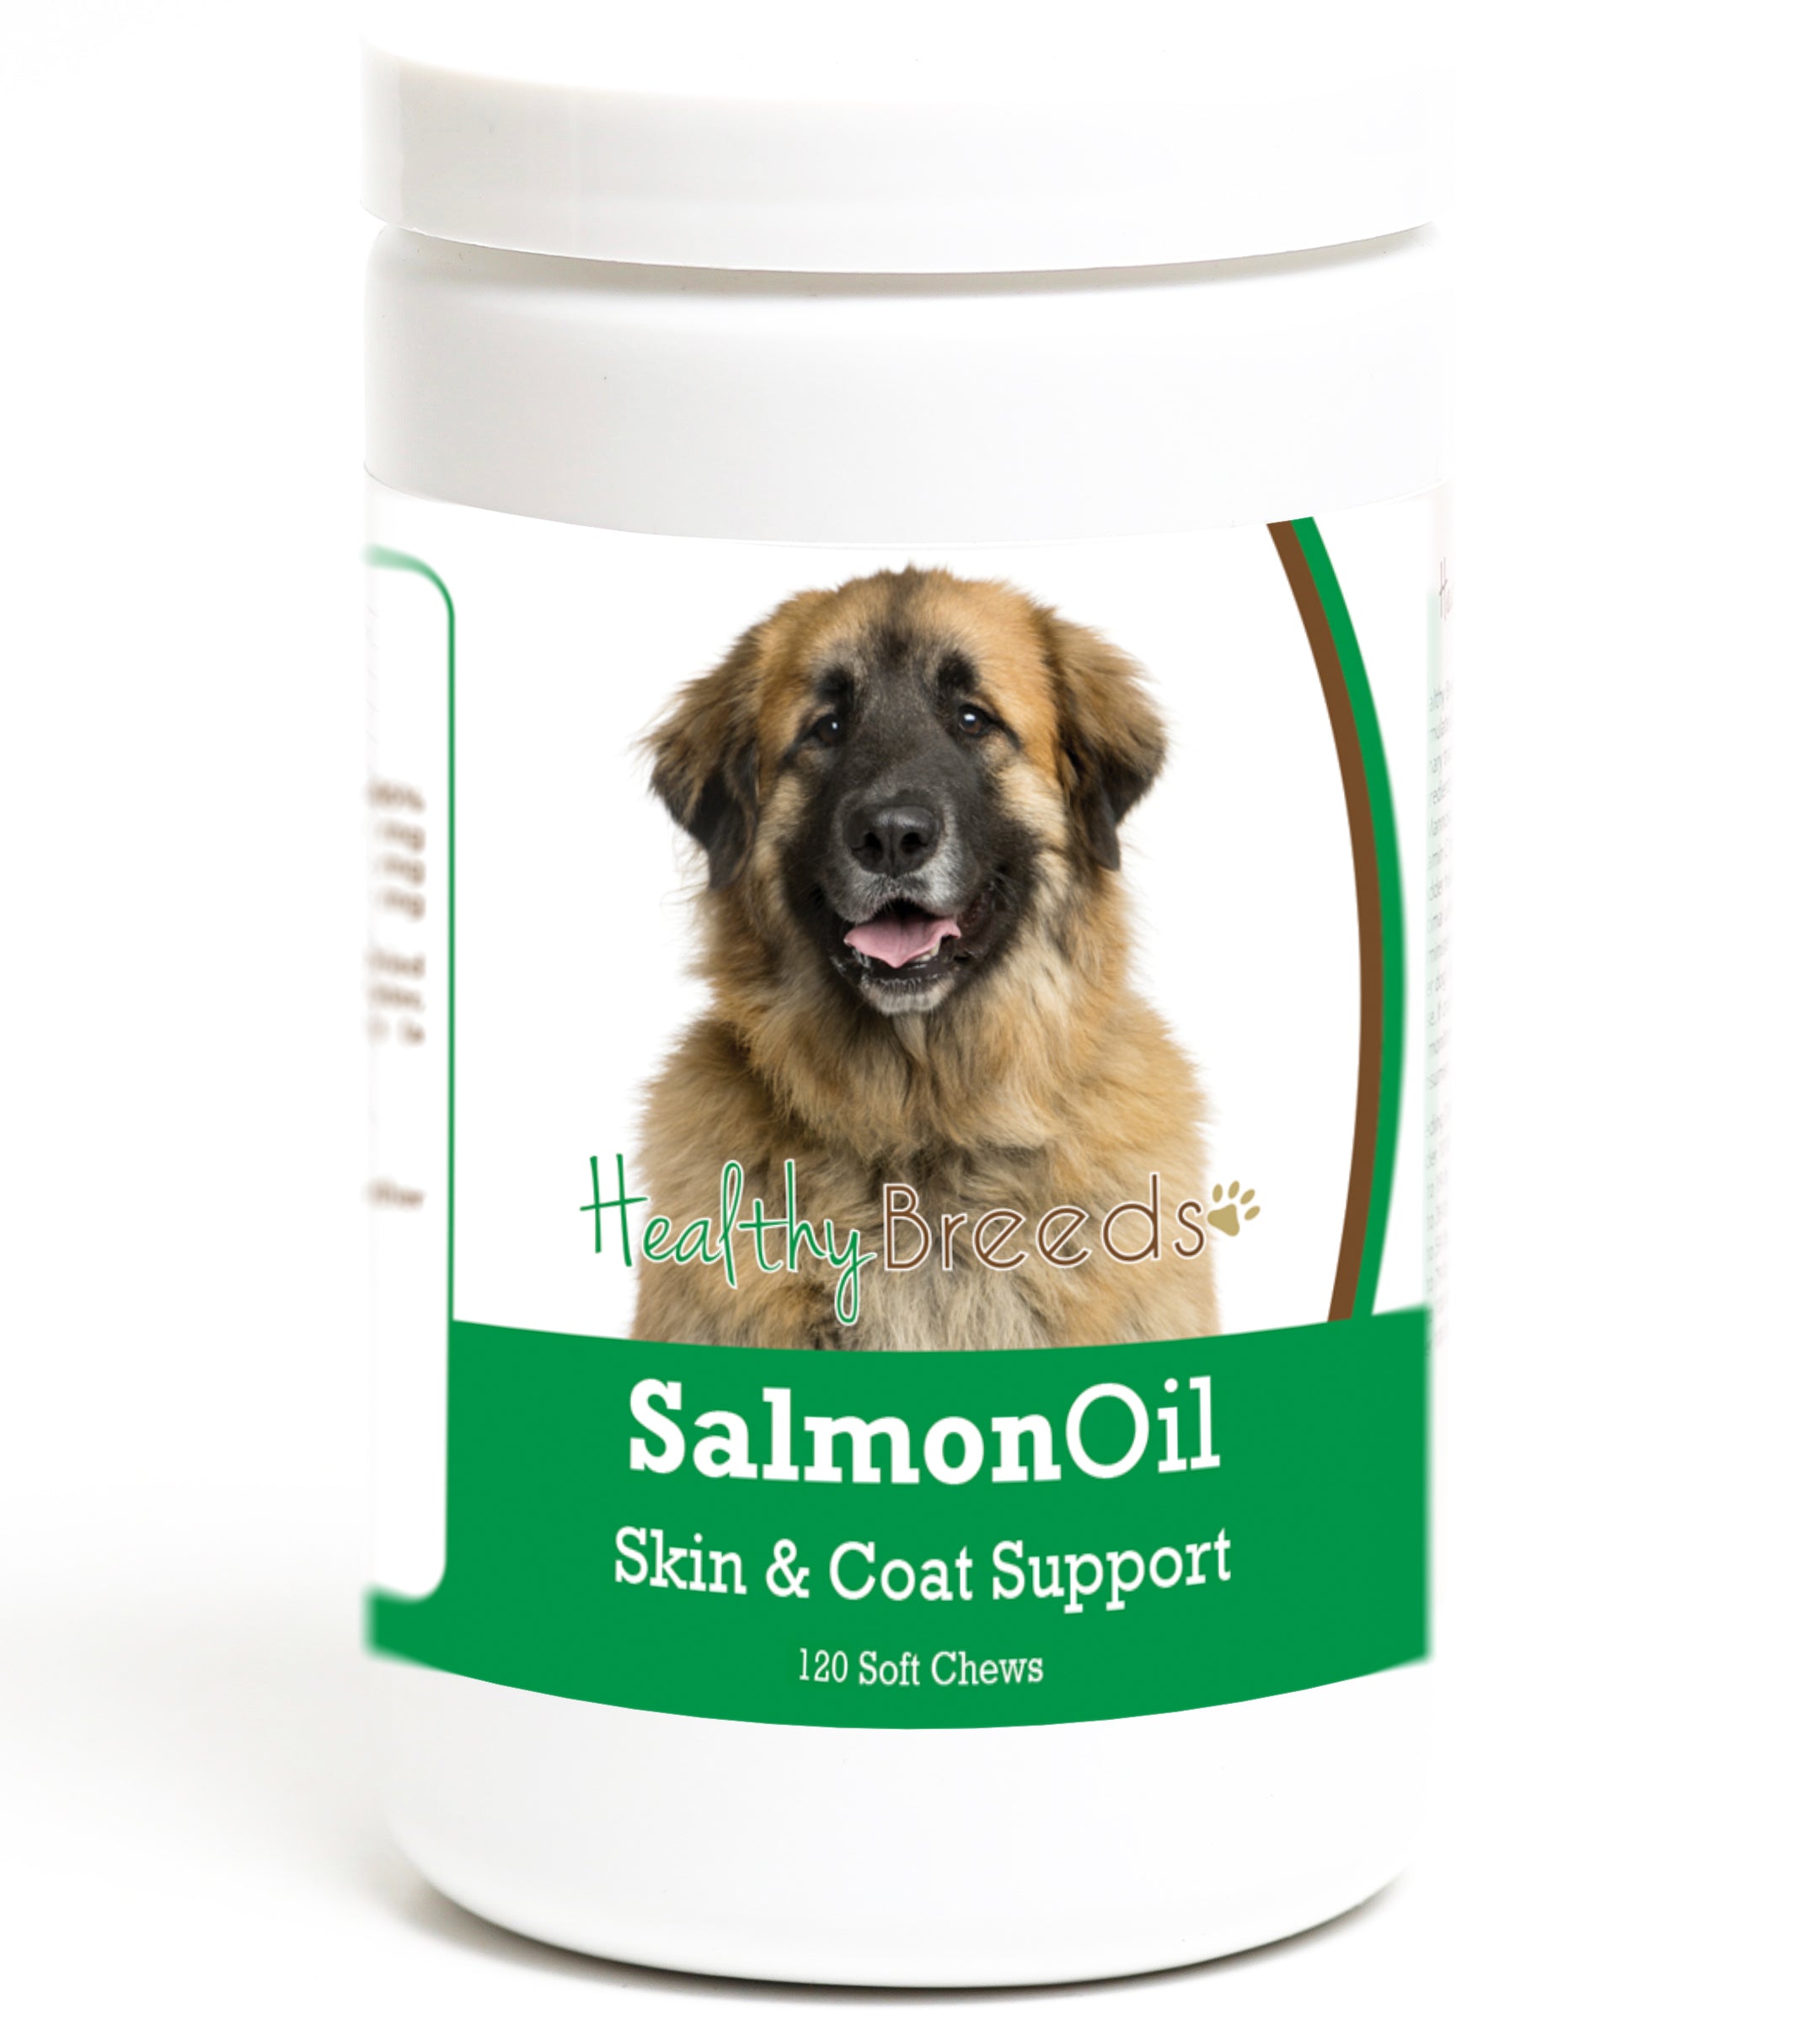 Leonberger Salmon Oil Soft Chews 120 Count